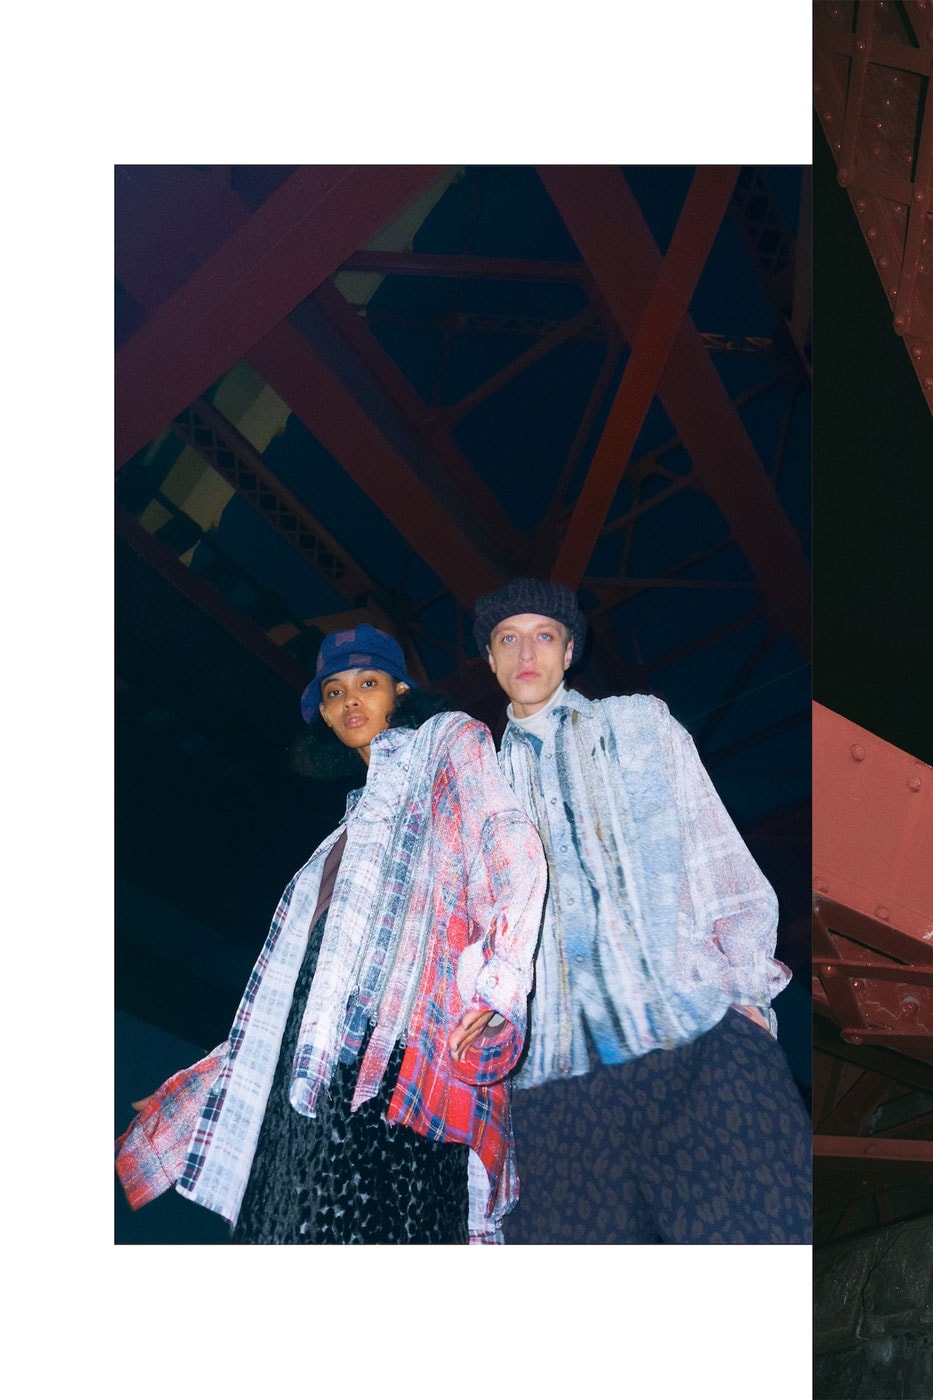 Needles fall winter 2022 lookbook jacquard checked ogee broacde print suits hats jackets tracksuits fur caps baker hats  imagesrelease info 